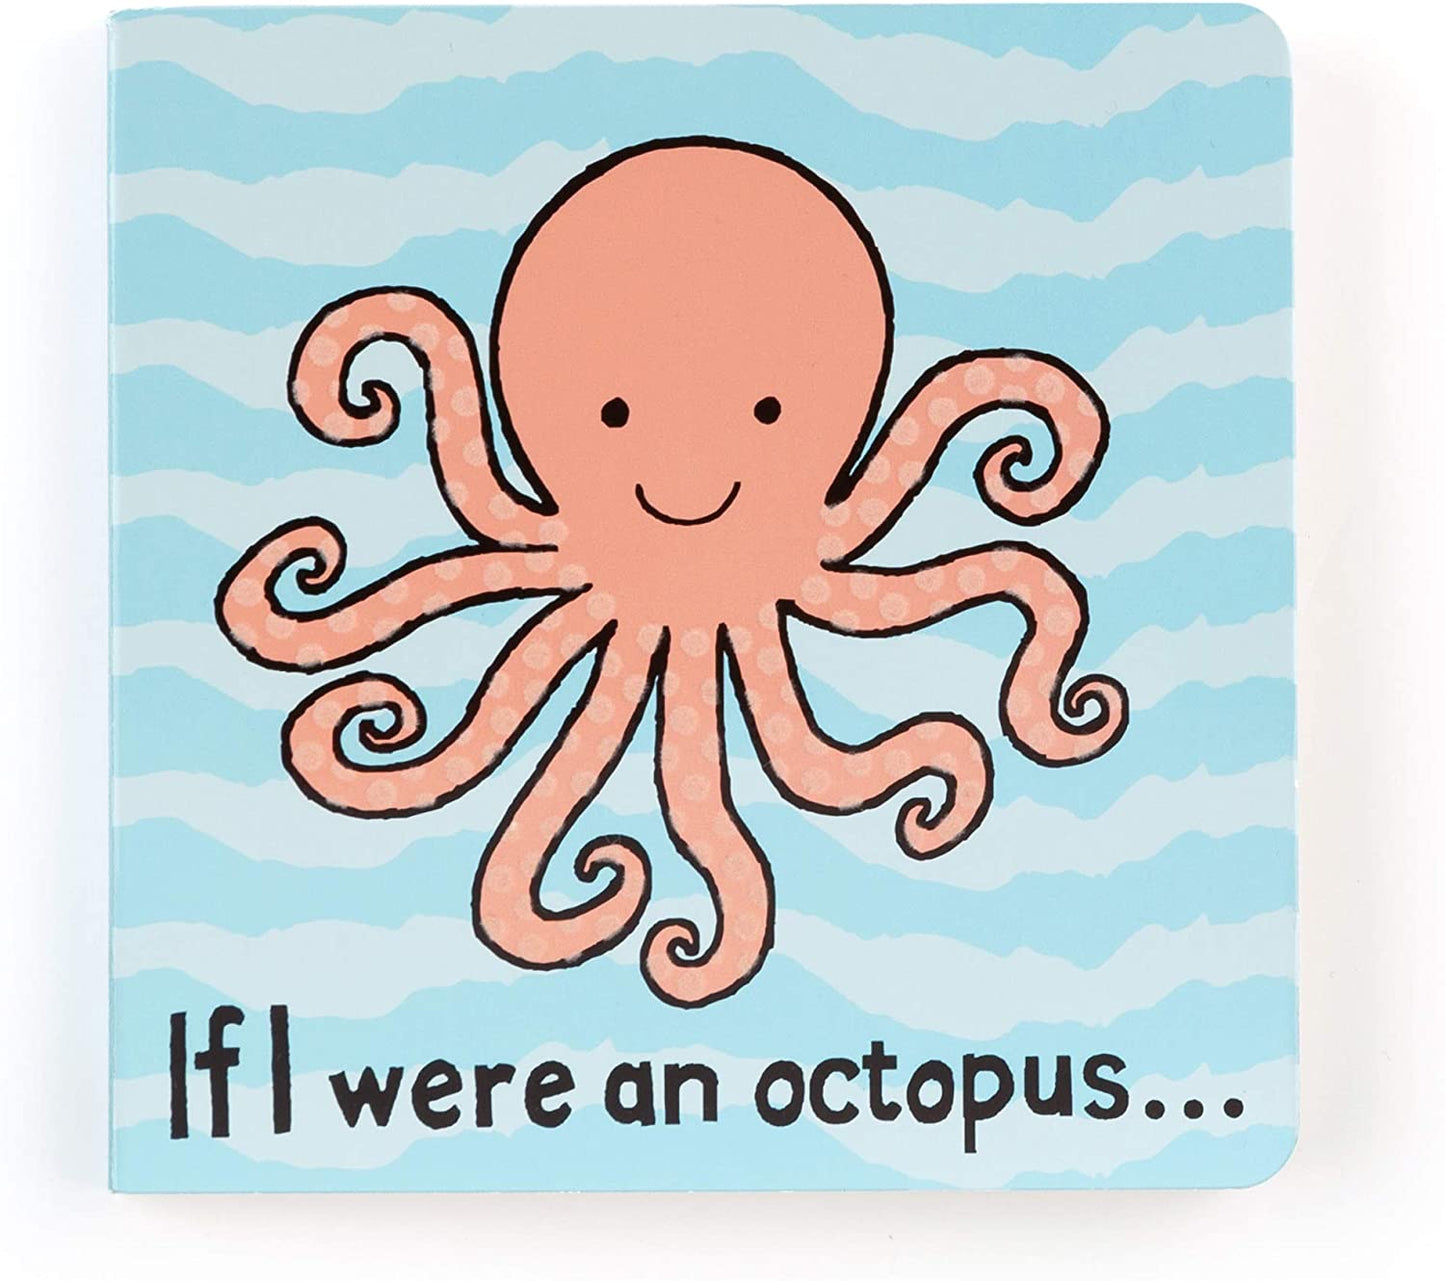 If I Were an Octopus Book  - Doodlebug's Children's Boutique